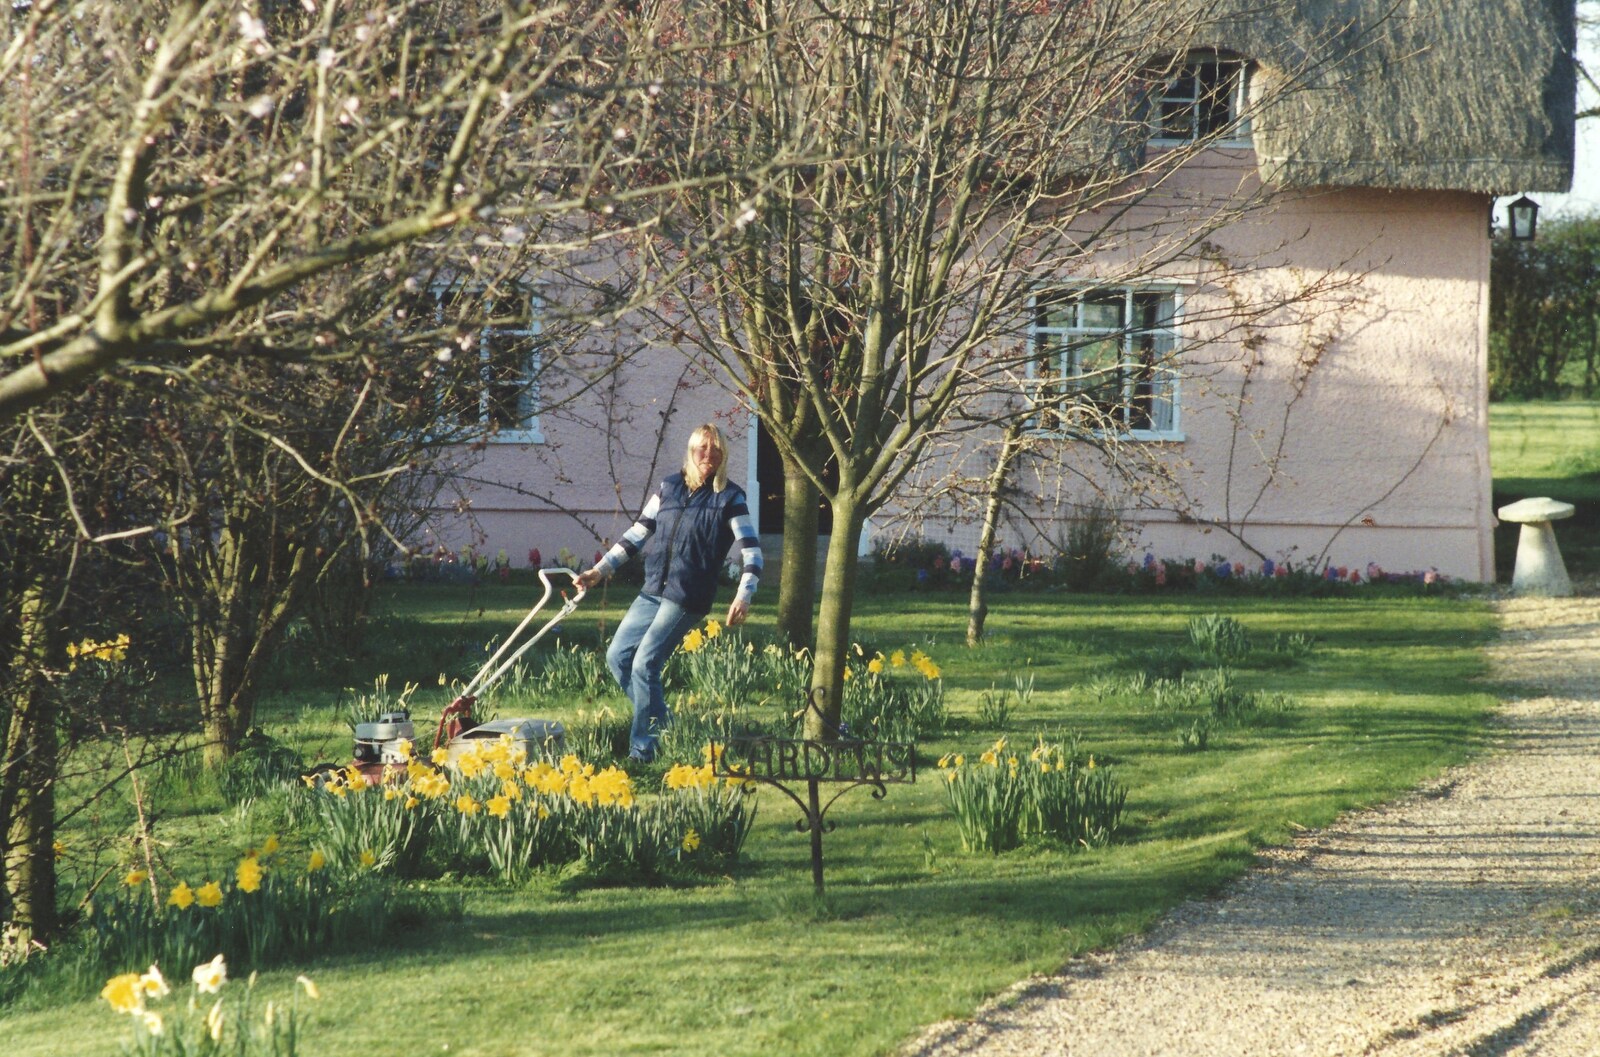 'Mad' Sue is mowing the lawn from Bernie and the Porch, The Stables, Stuston, Suffolk - 15th March 1991